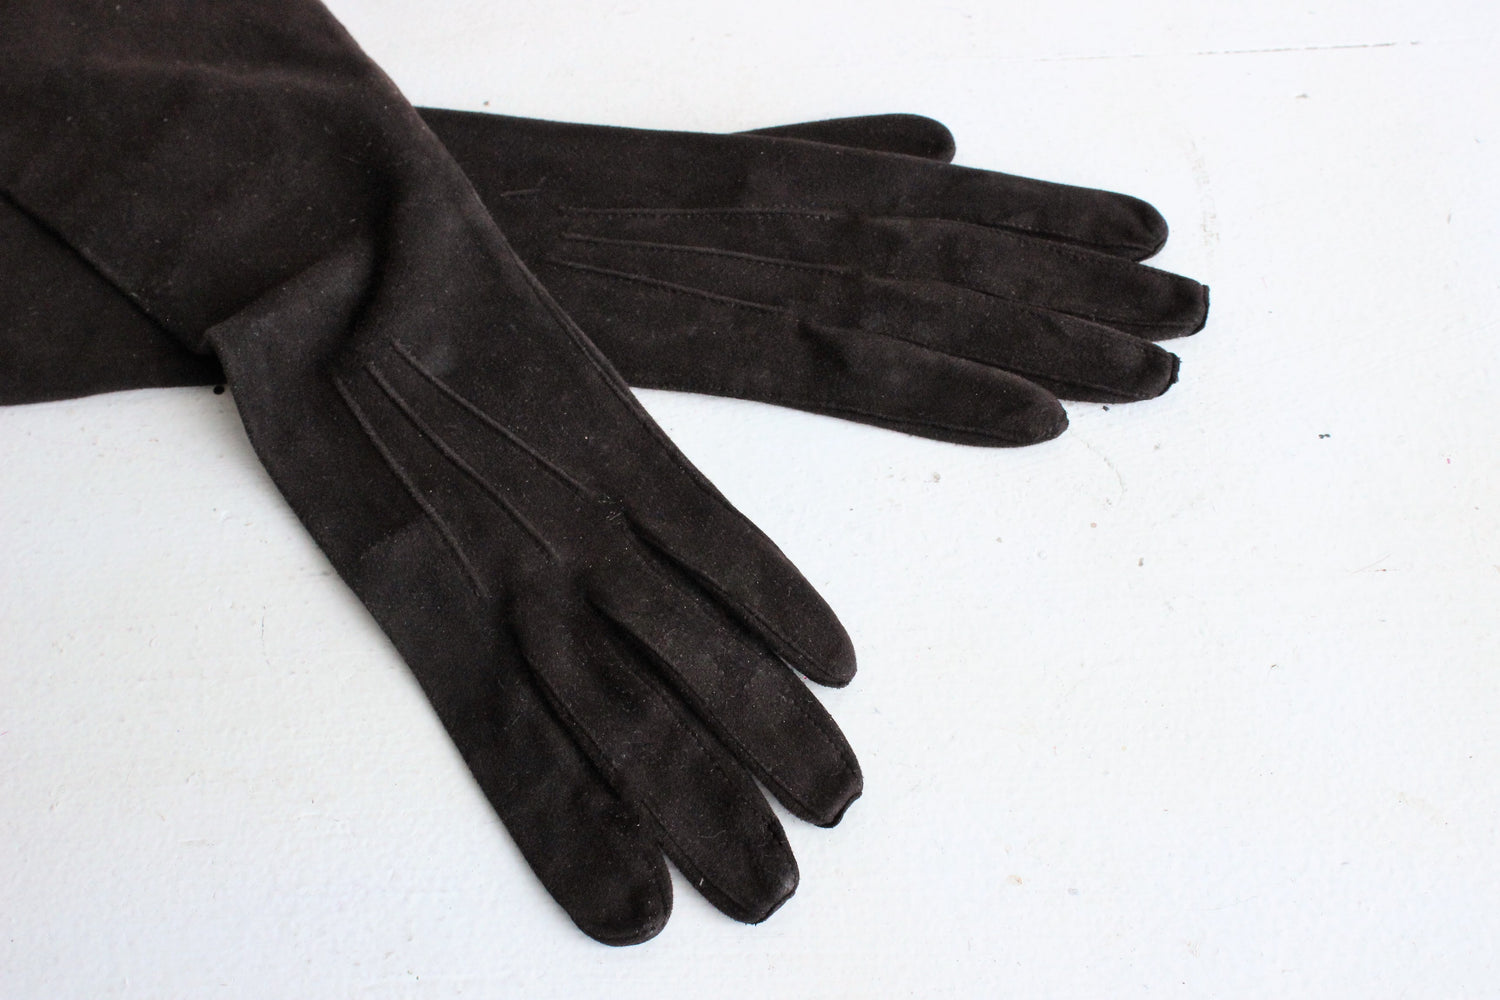 Vintage 1950s 1960s Brown Suede Gloves by Aris Four Hundred